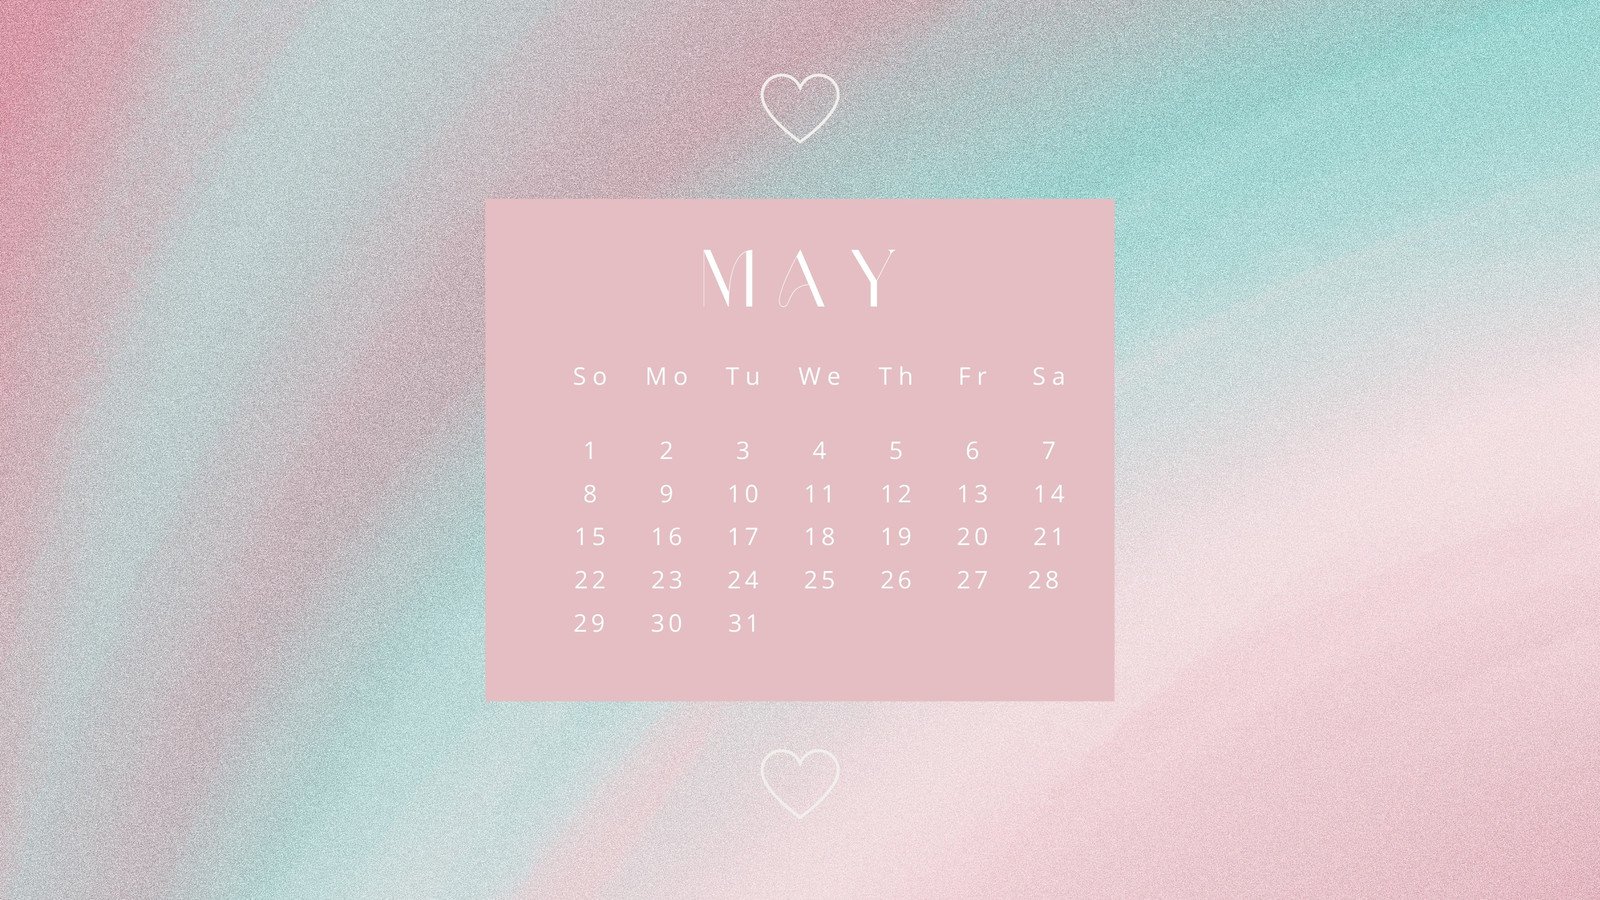 A calendar with pink and blue hearts on it - May